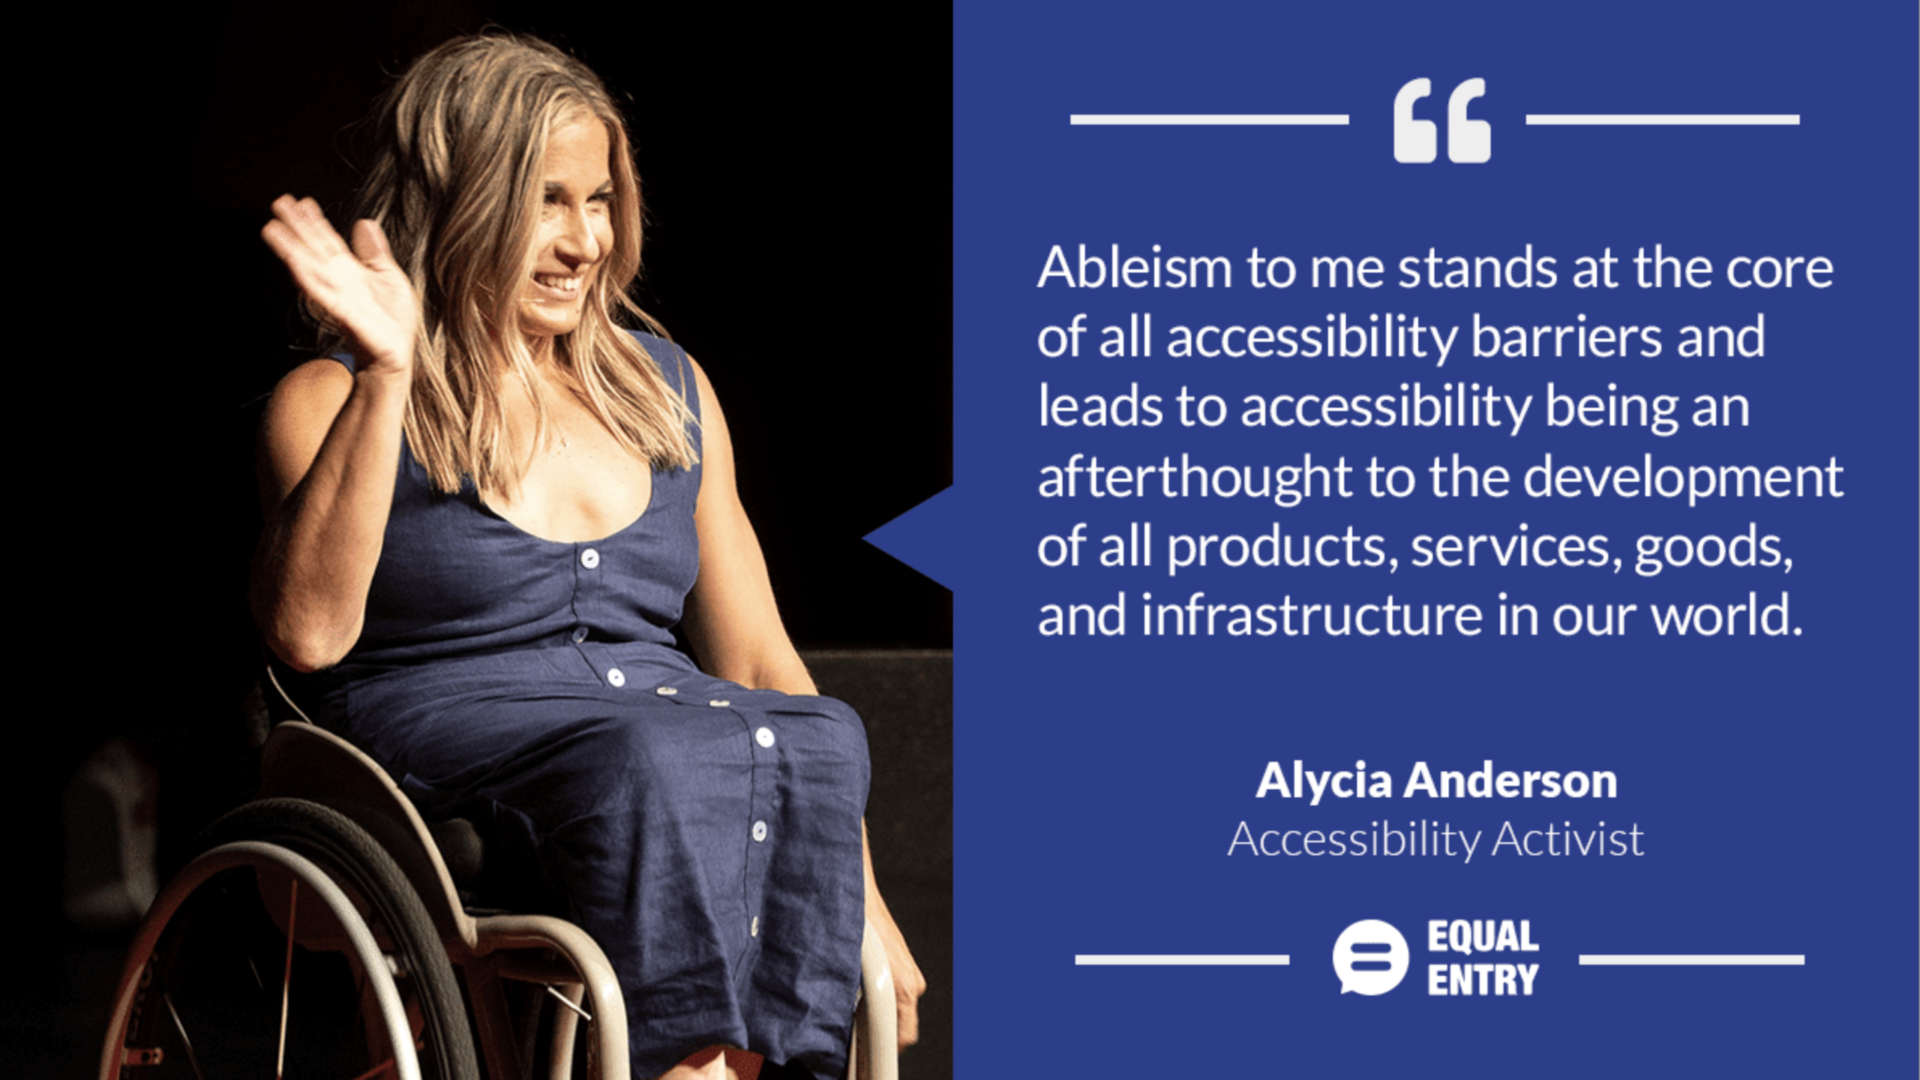 alycia waving next to her quote ableism to me stands at the core of all accessibility barriers and leads to accessibility being an afterthought to the development of all products services goods and infrastructure in our world